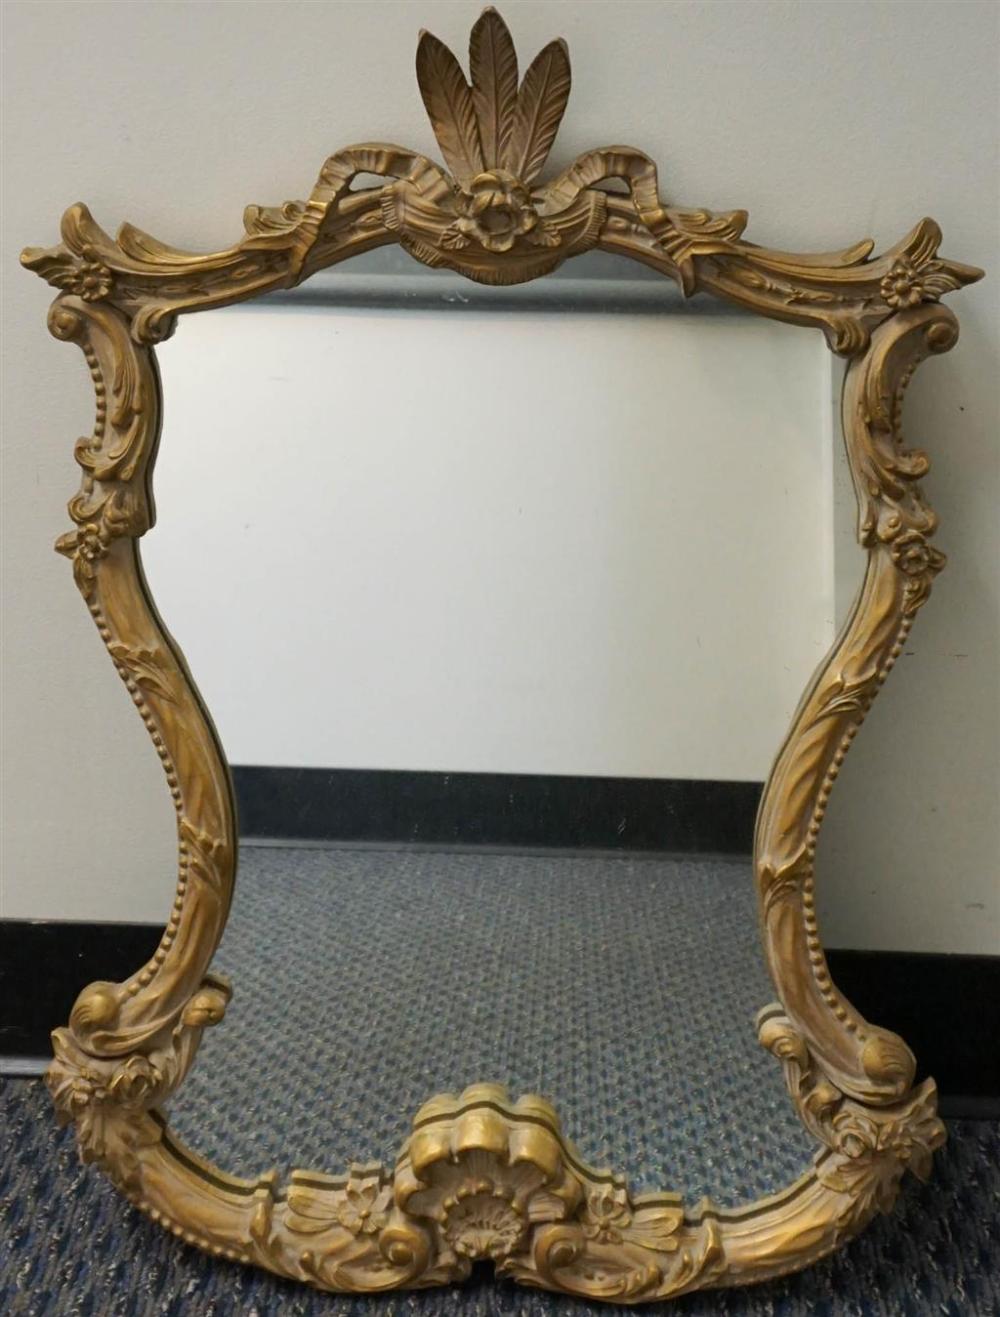 LOUIS XV STYLE GILT DECORATED FRAME